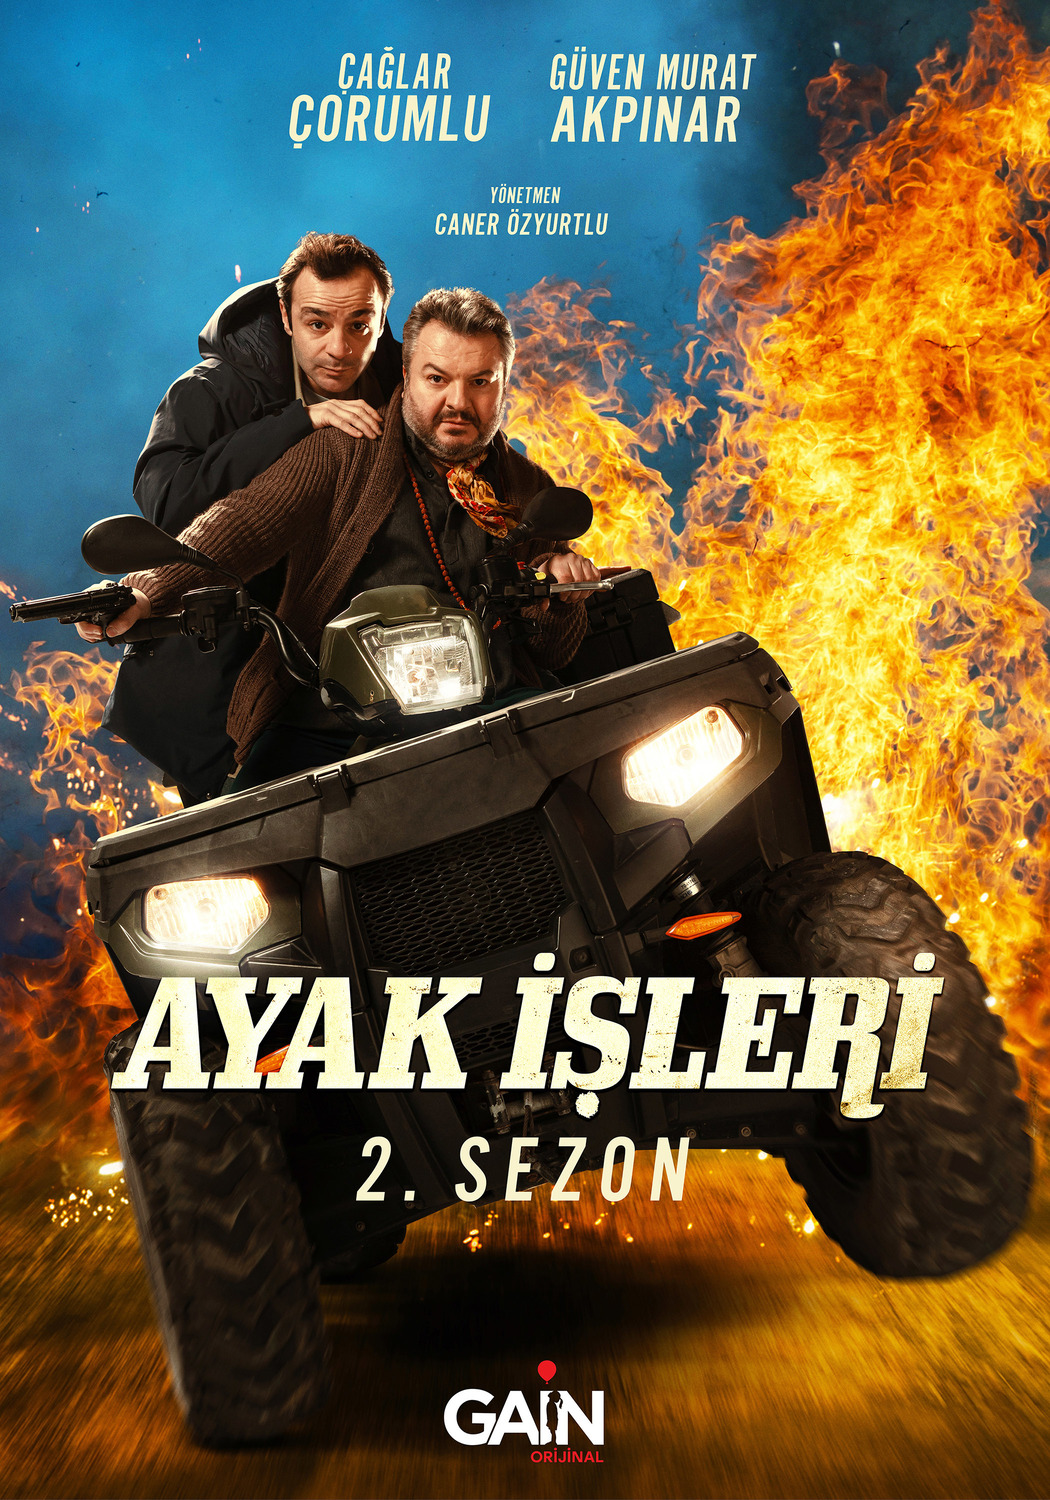 Extra Large TV Poster Image for Ayak Isleri (#4 of 8)